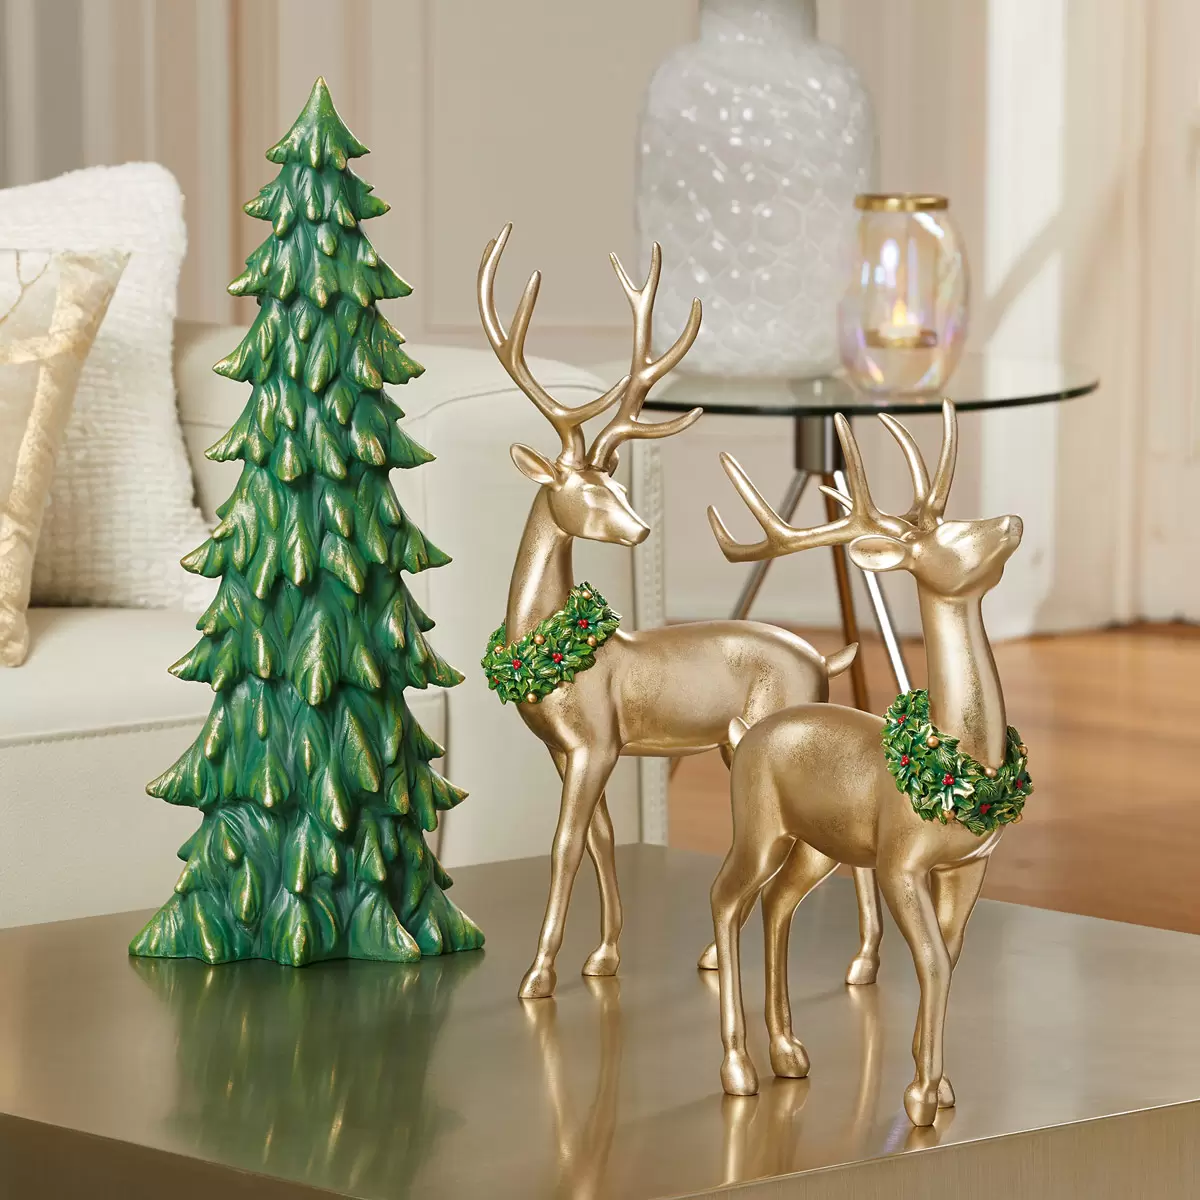 Buy Holiday Deer with Tree Deer Image at costco.co.uk